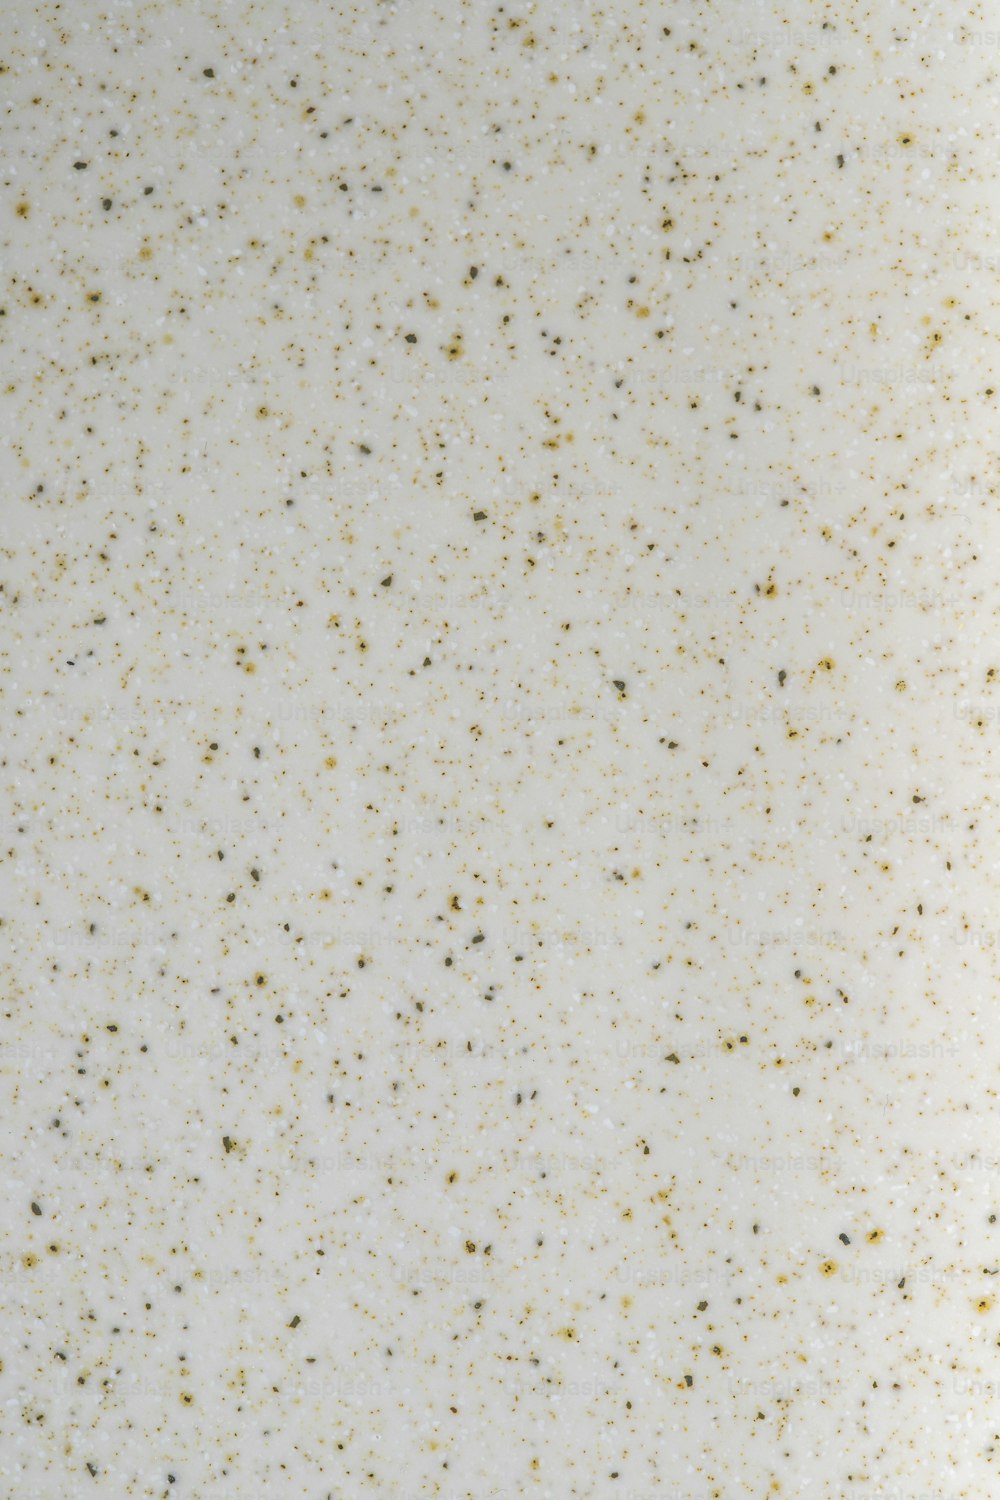 a close up of a white surface with gold speckles